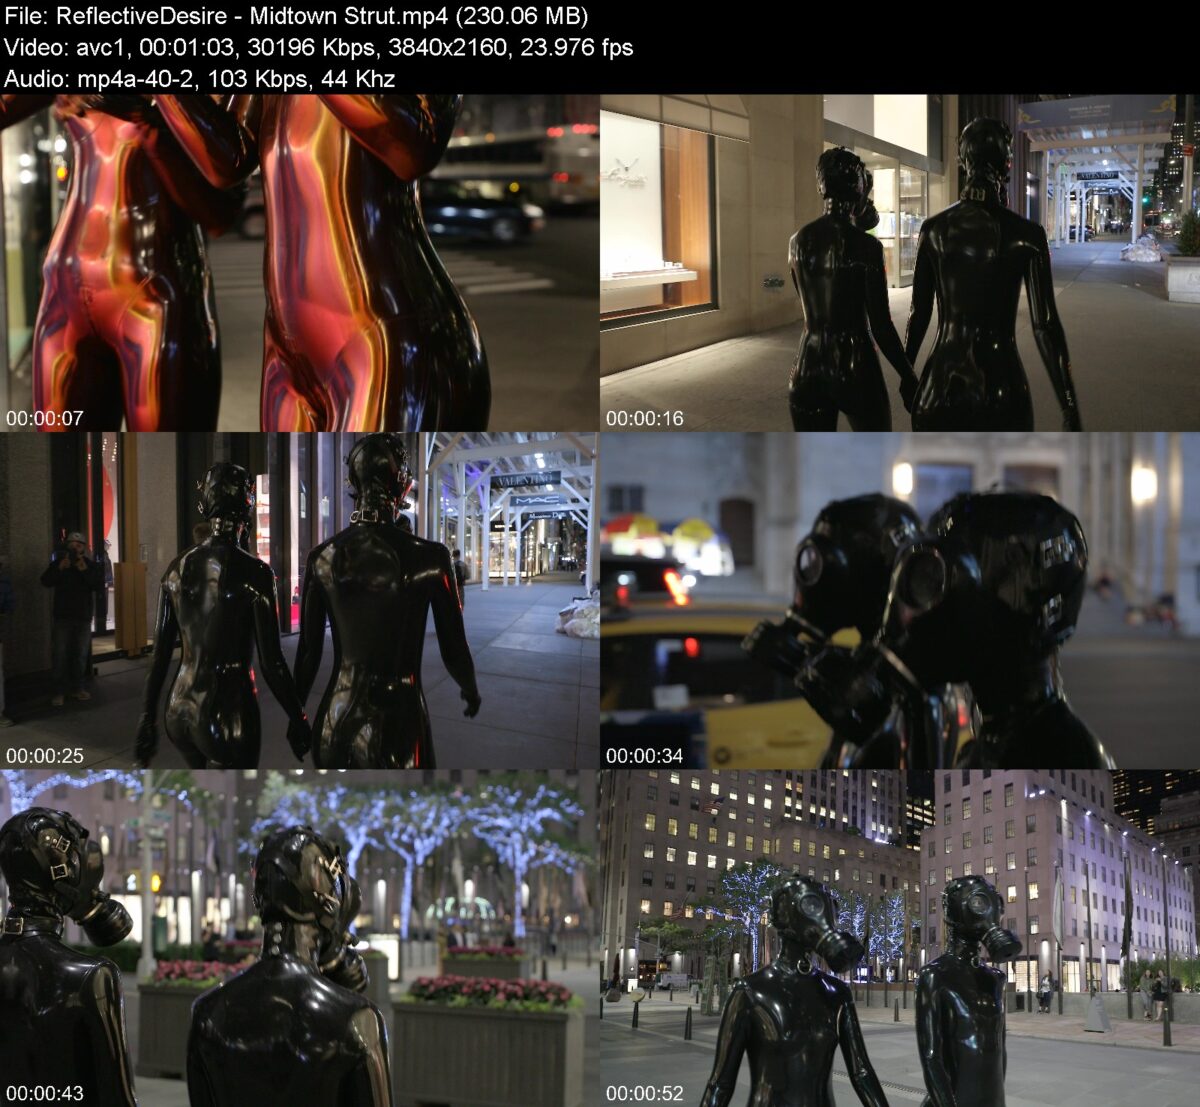 Actress: ReflectiveDesire. Title and Studio: Midtown Strut